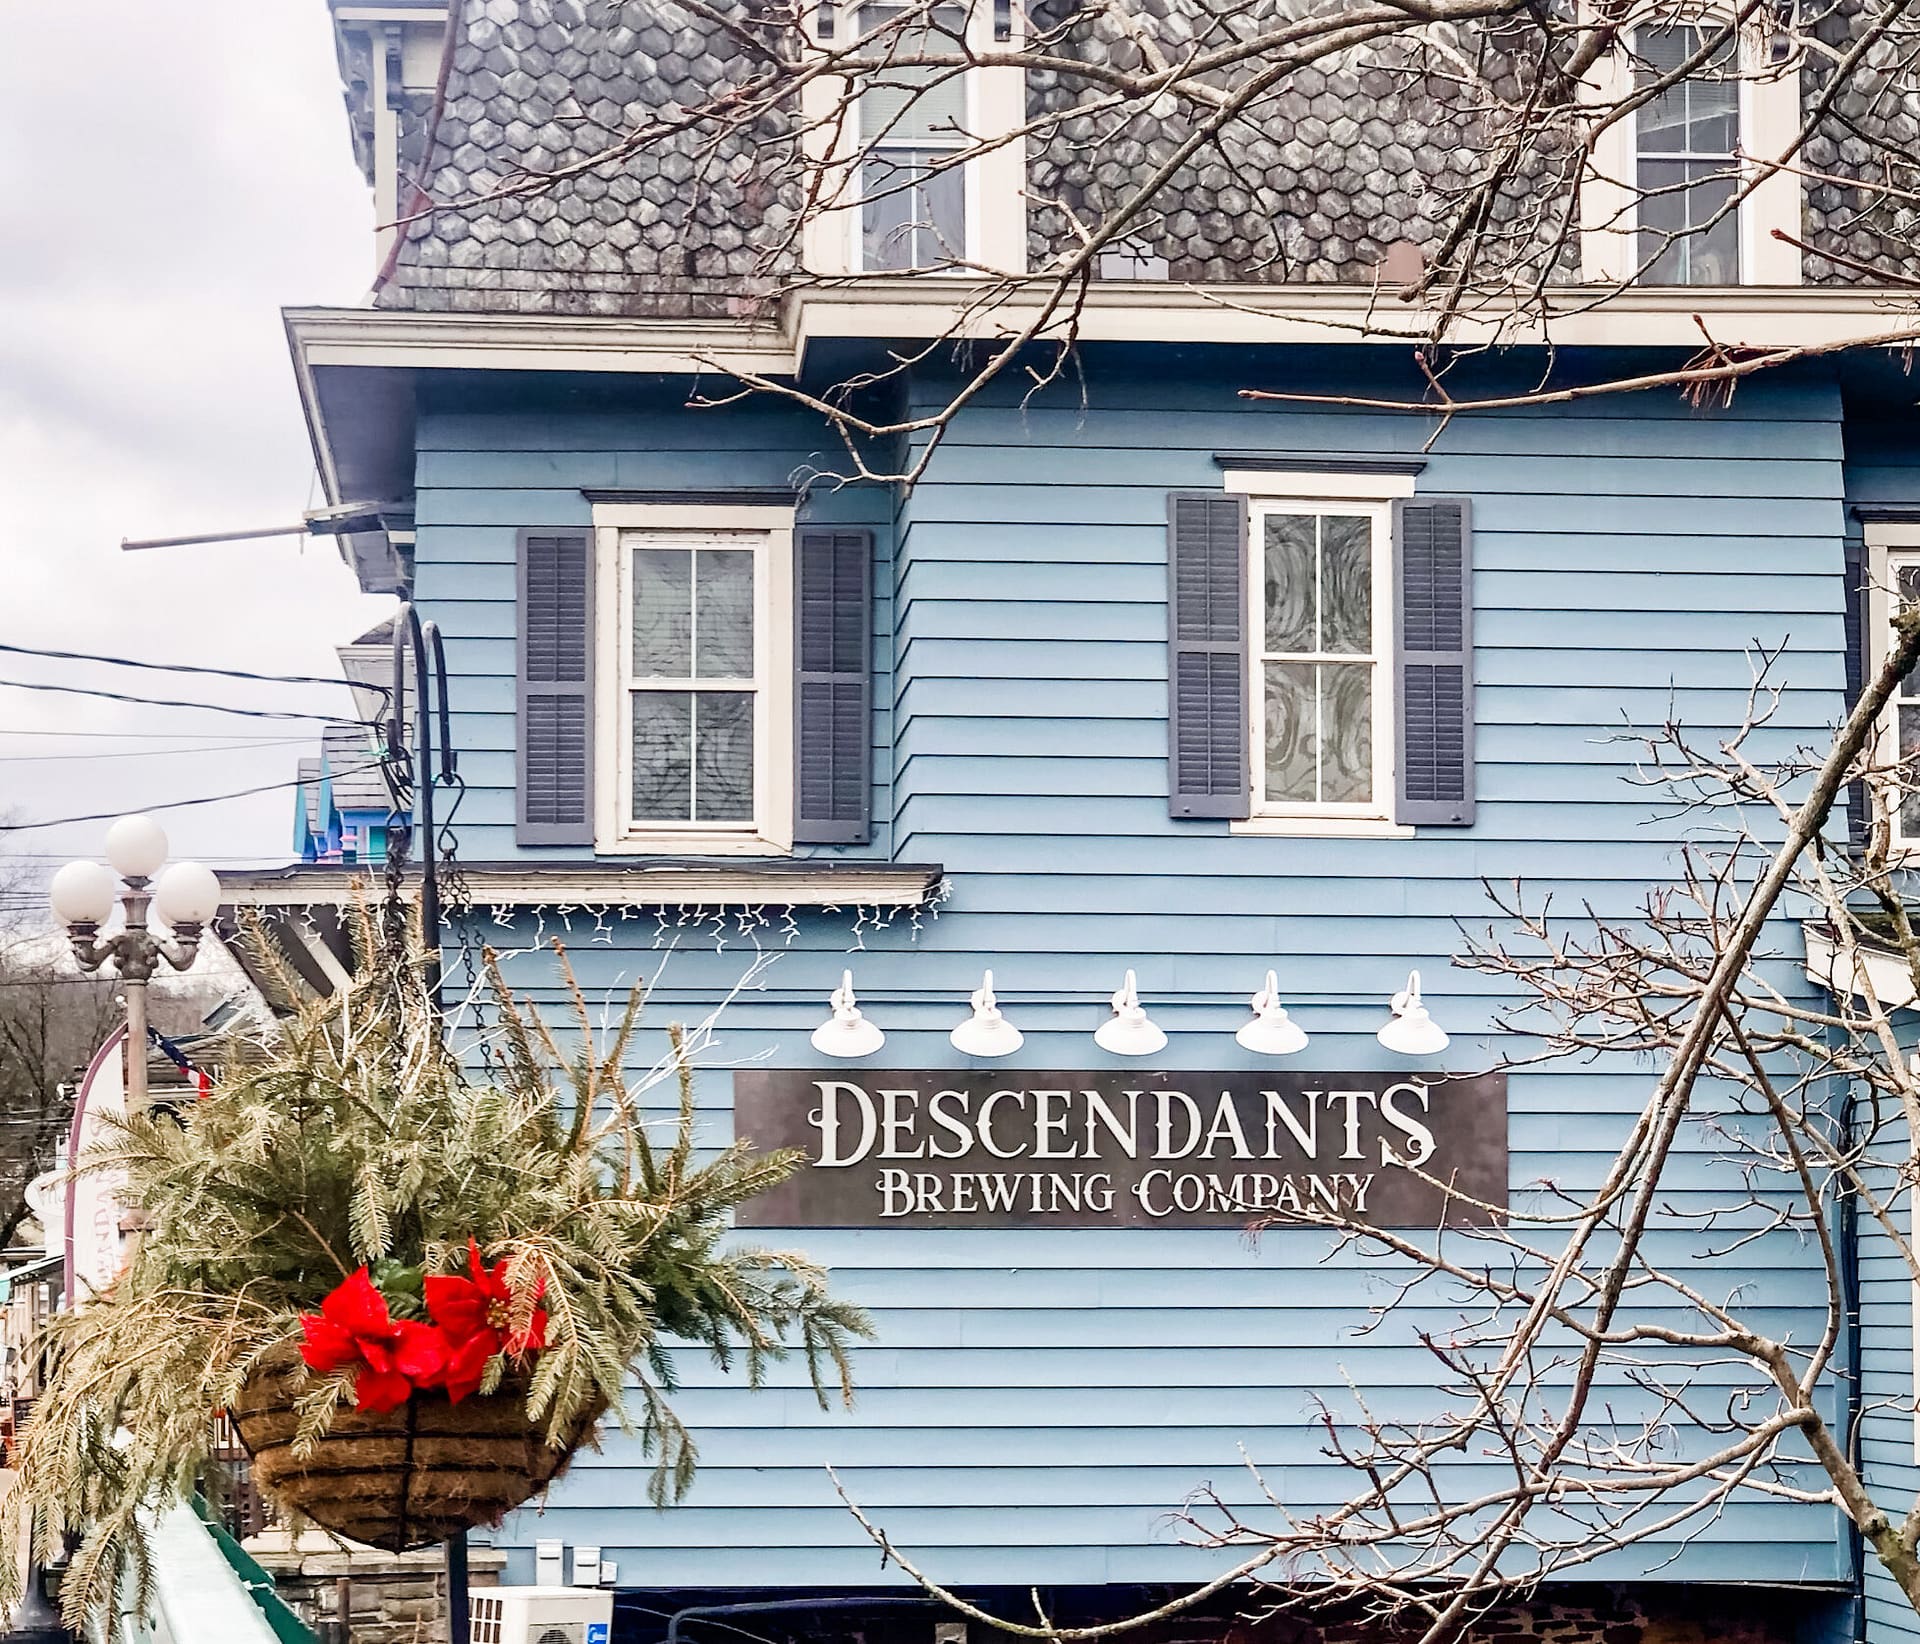 Outside of colonial blue building sign hanging reads Descendants Brewing Company